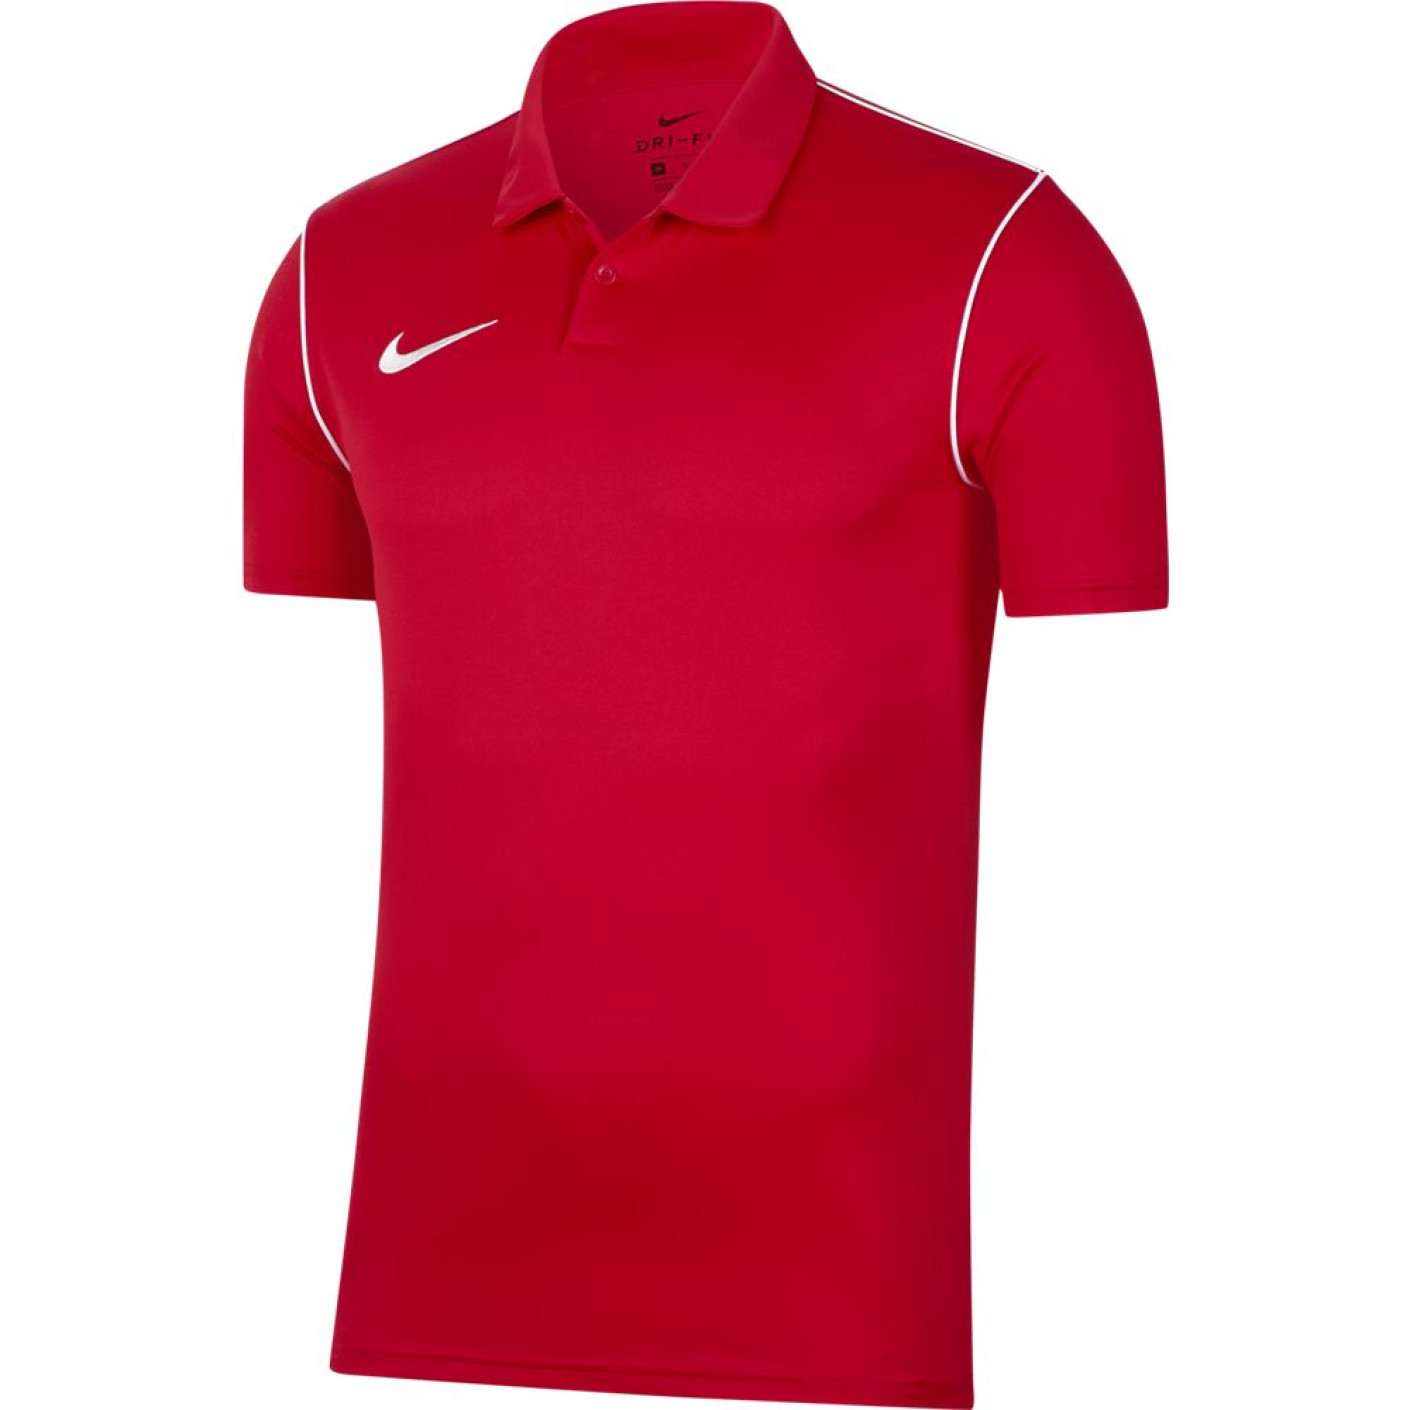 Nike Dry Park 20 Polo Red